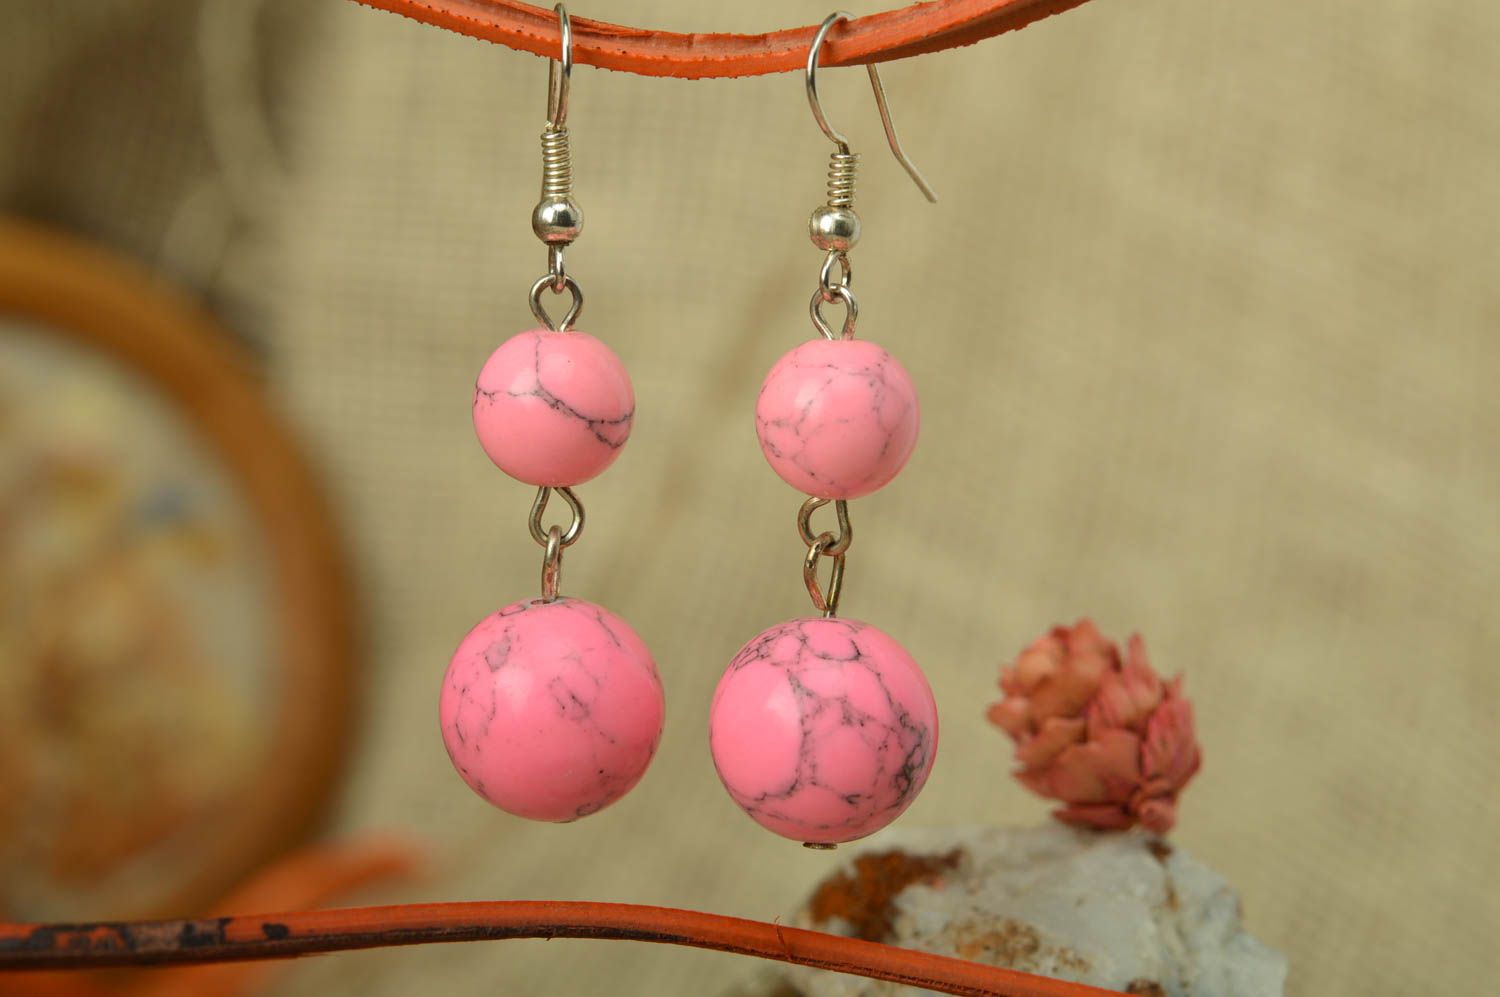 Handmade designer long dangle earrings with pink round beads tender for ladies photo 1